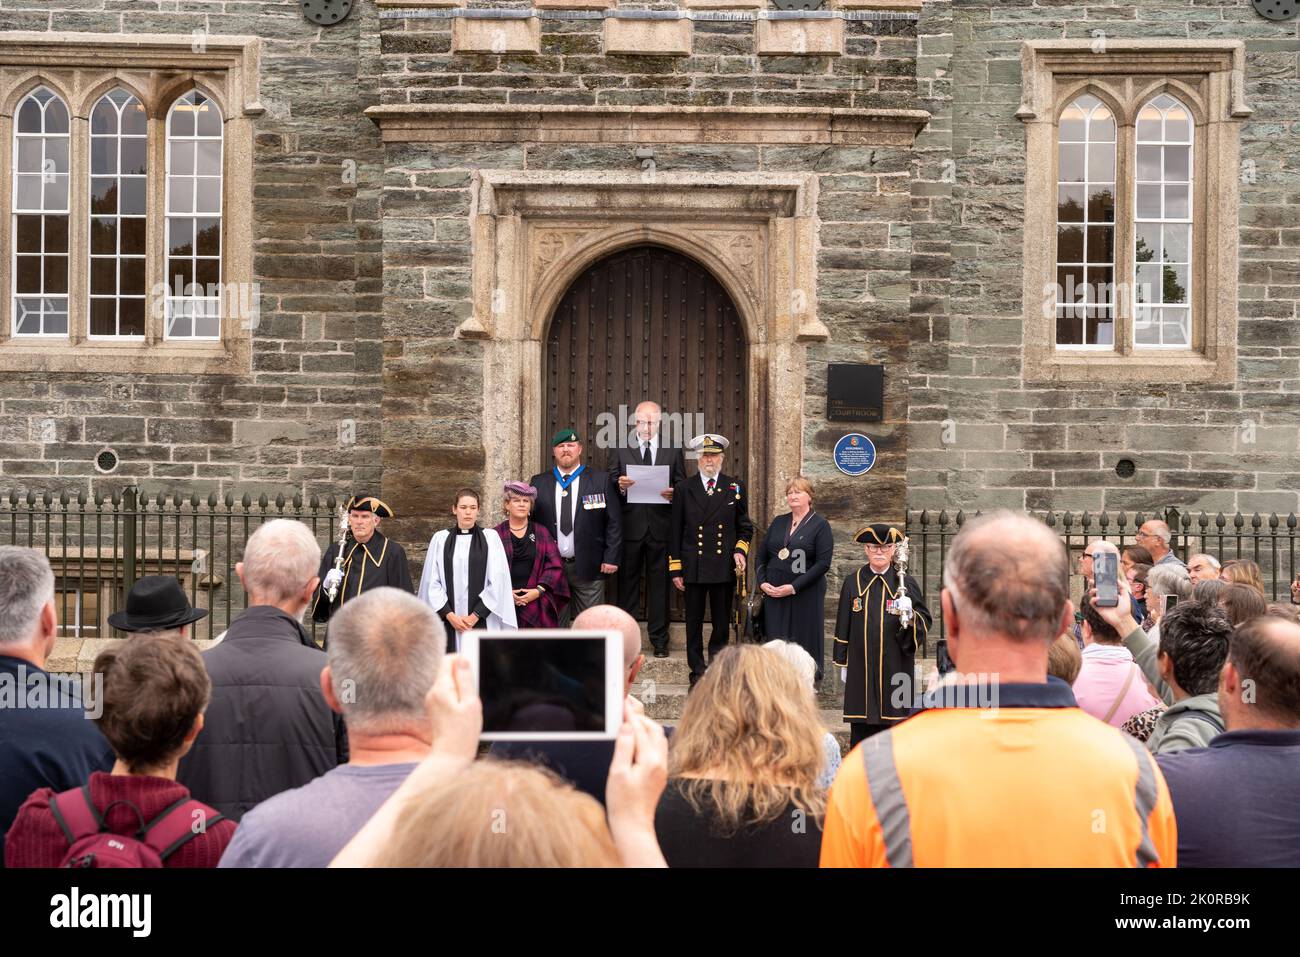 The Clerk to Tavistock Town Council, Carl Hearn, read the Proclamation from the steps of The Guildhall joined by dignitaries and Civic leaders including Ric Cheadle (Deputy Lord Lieutenant of Devon), Councillor James Ellis (Deputy Mayor of Tavistock), Councillor Caroline Mott (Mayor of West Devon), County Councillor Debo Sellis, Reverend Rosie Illingworth, and accompanied by the Town’s Mace Bearers Stock Photo